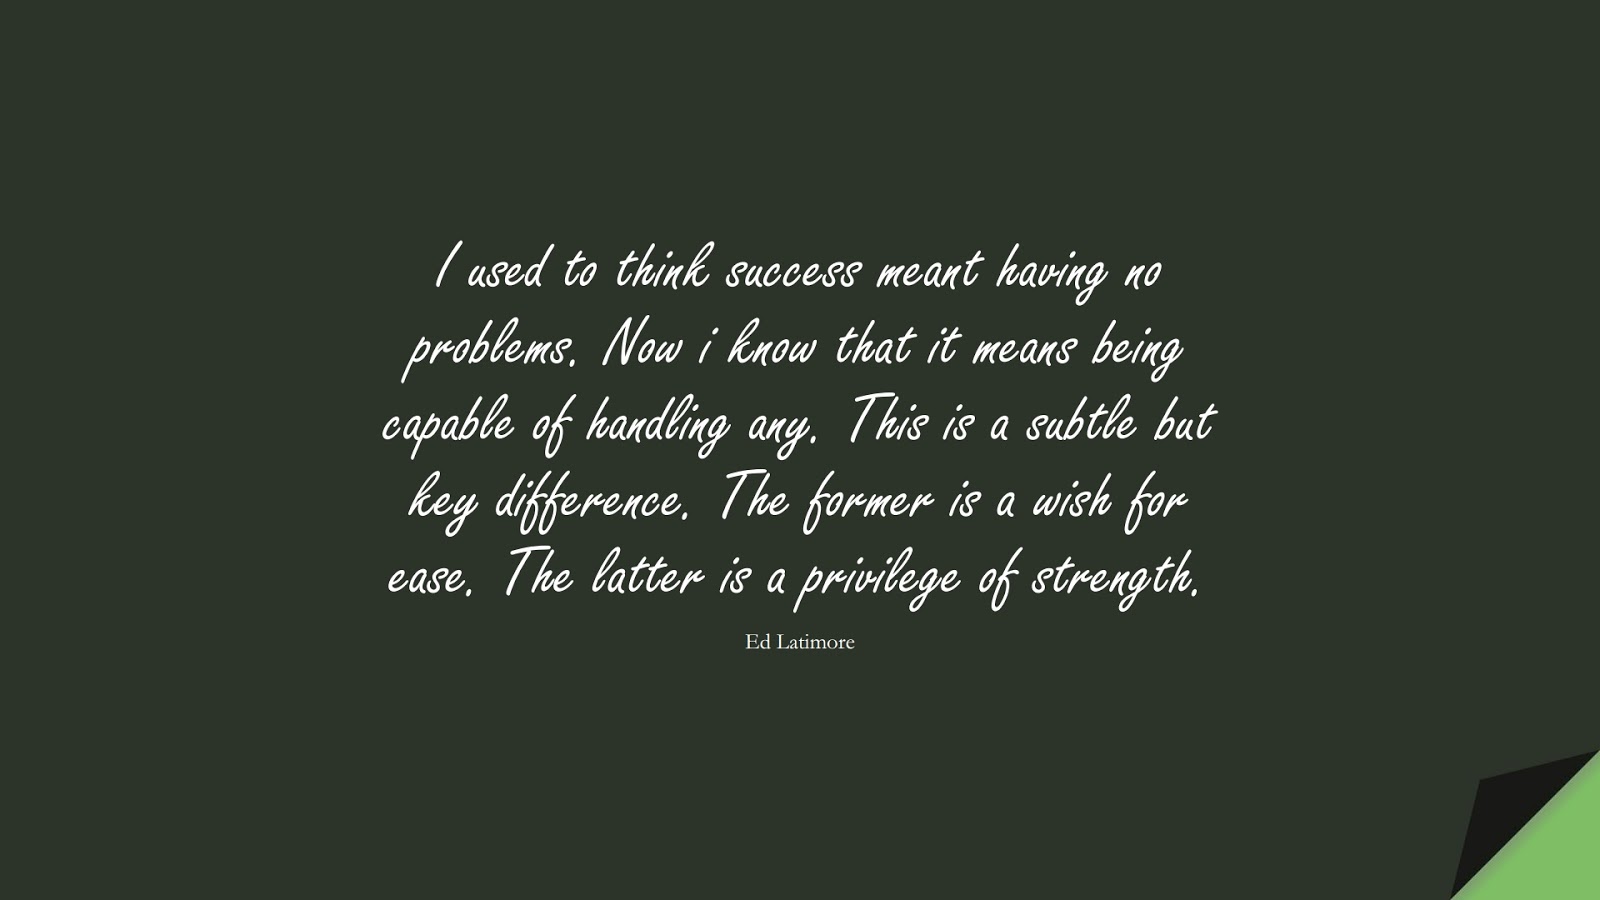 I used to think success meant having no problems. Now i know that it means being capable of handling any. This is a subtle but key difference. The former is a wish for ease. The latter is a privilege of strength. (Ed Latimore);  #BestQuotes